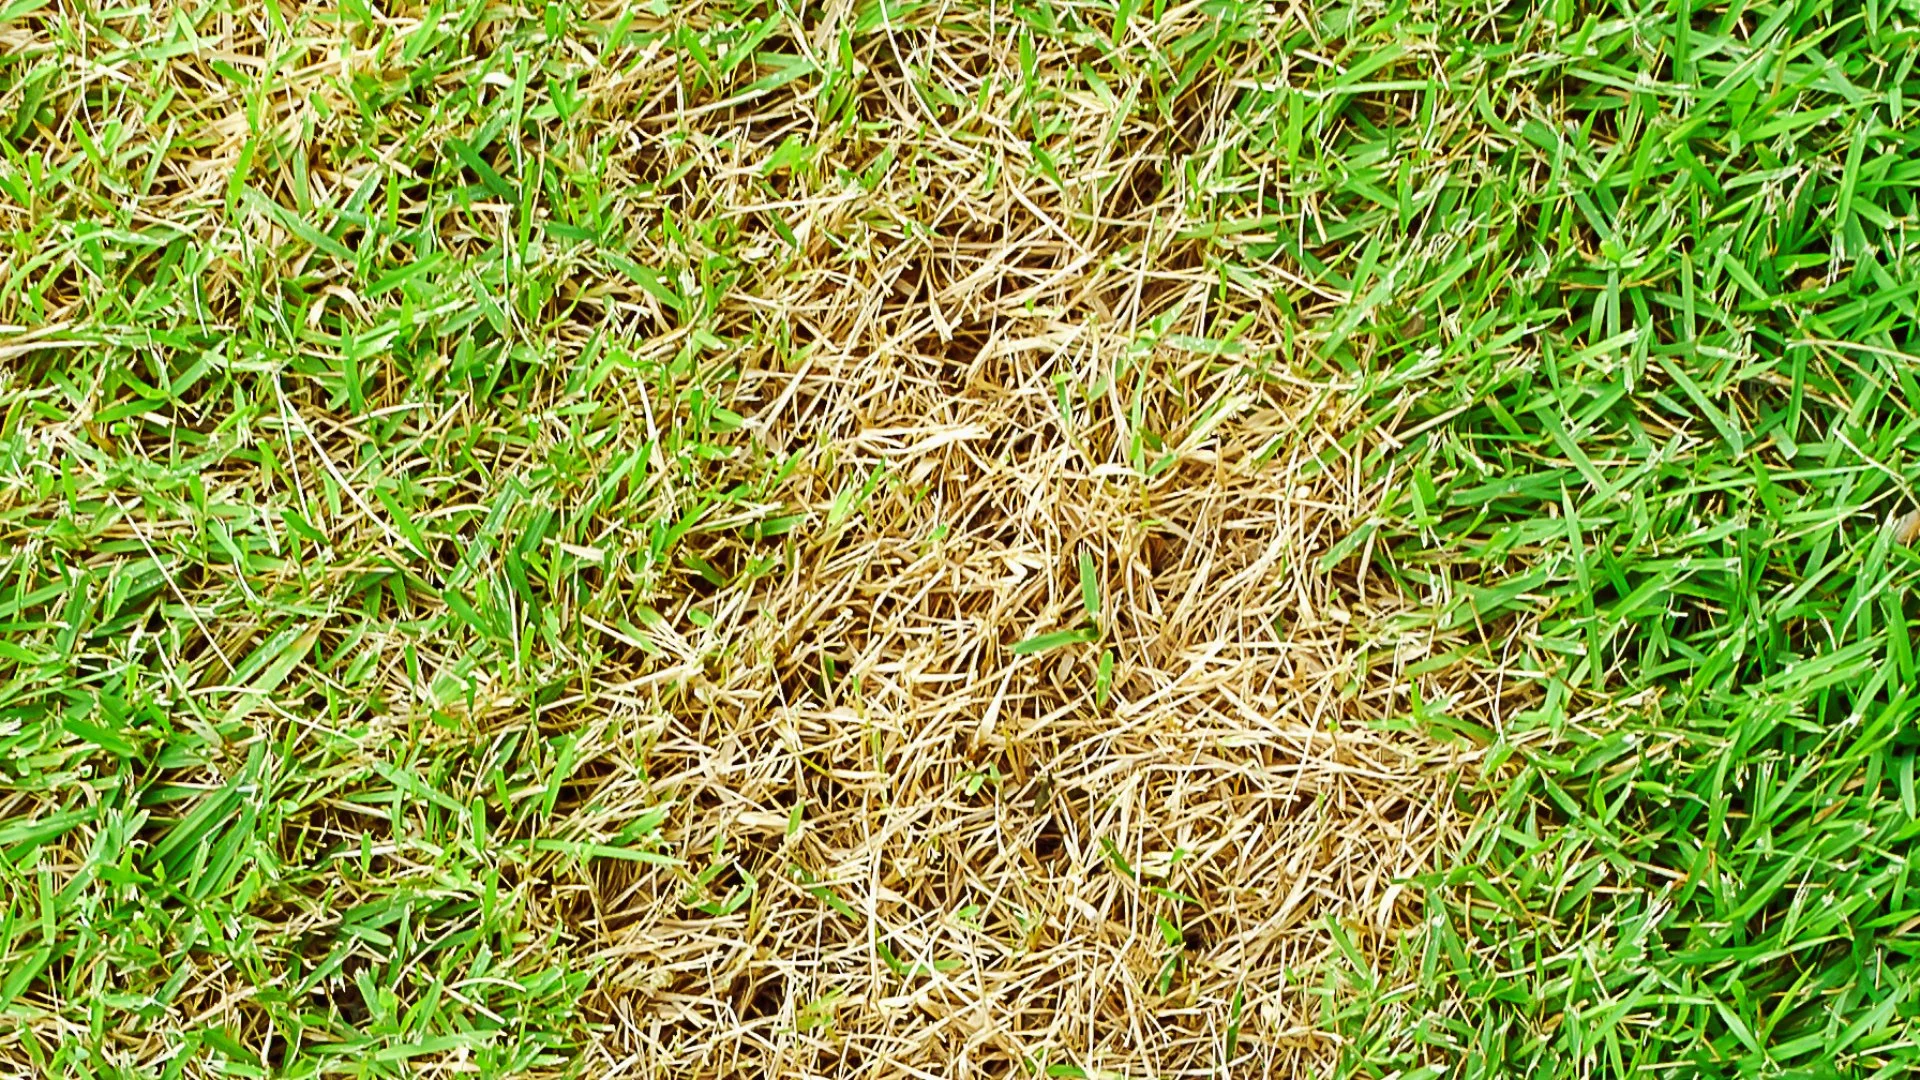 What Lawn Diseases Should You Be Aware of in Texas?